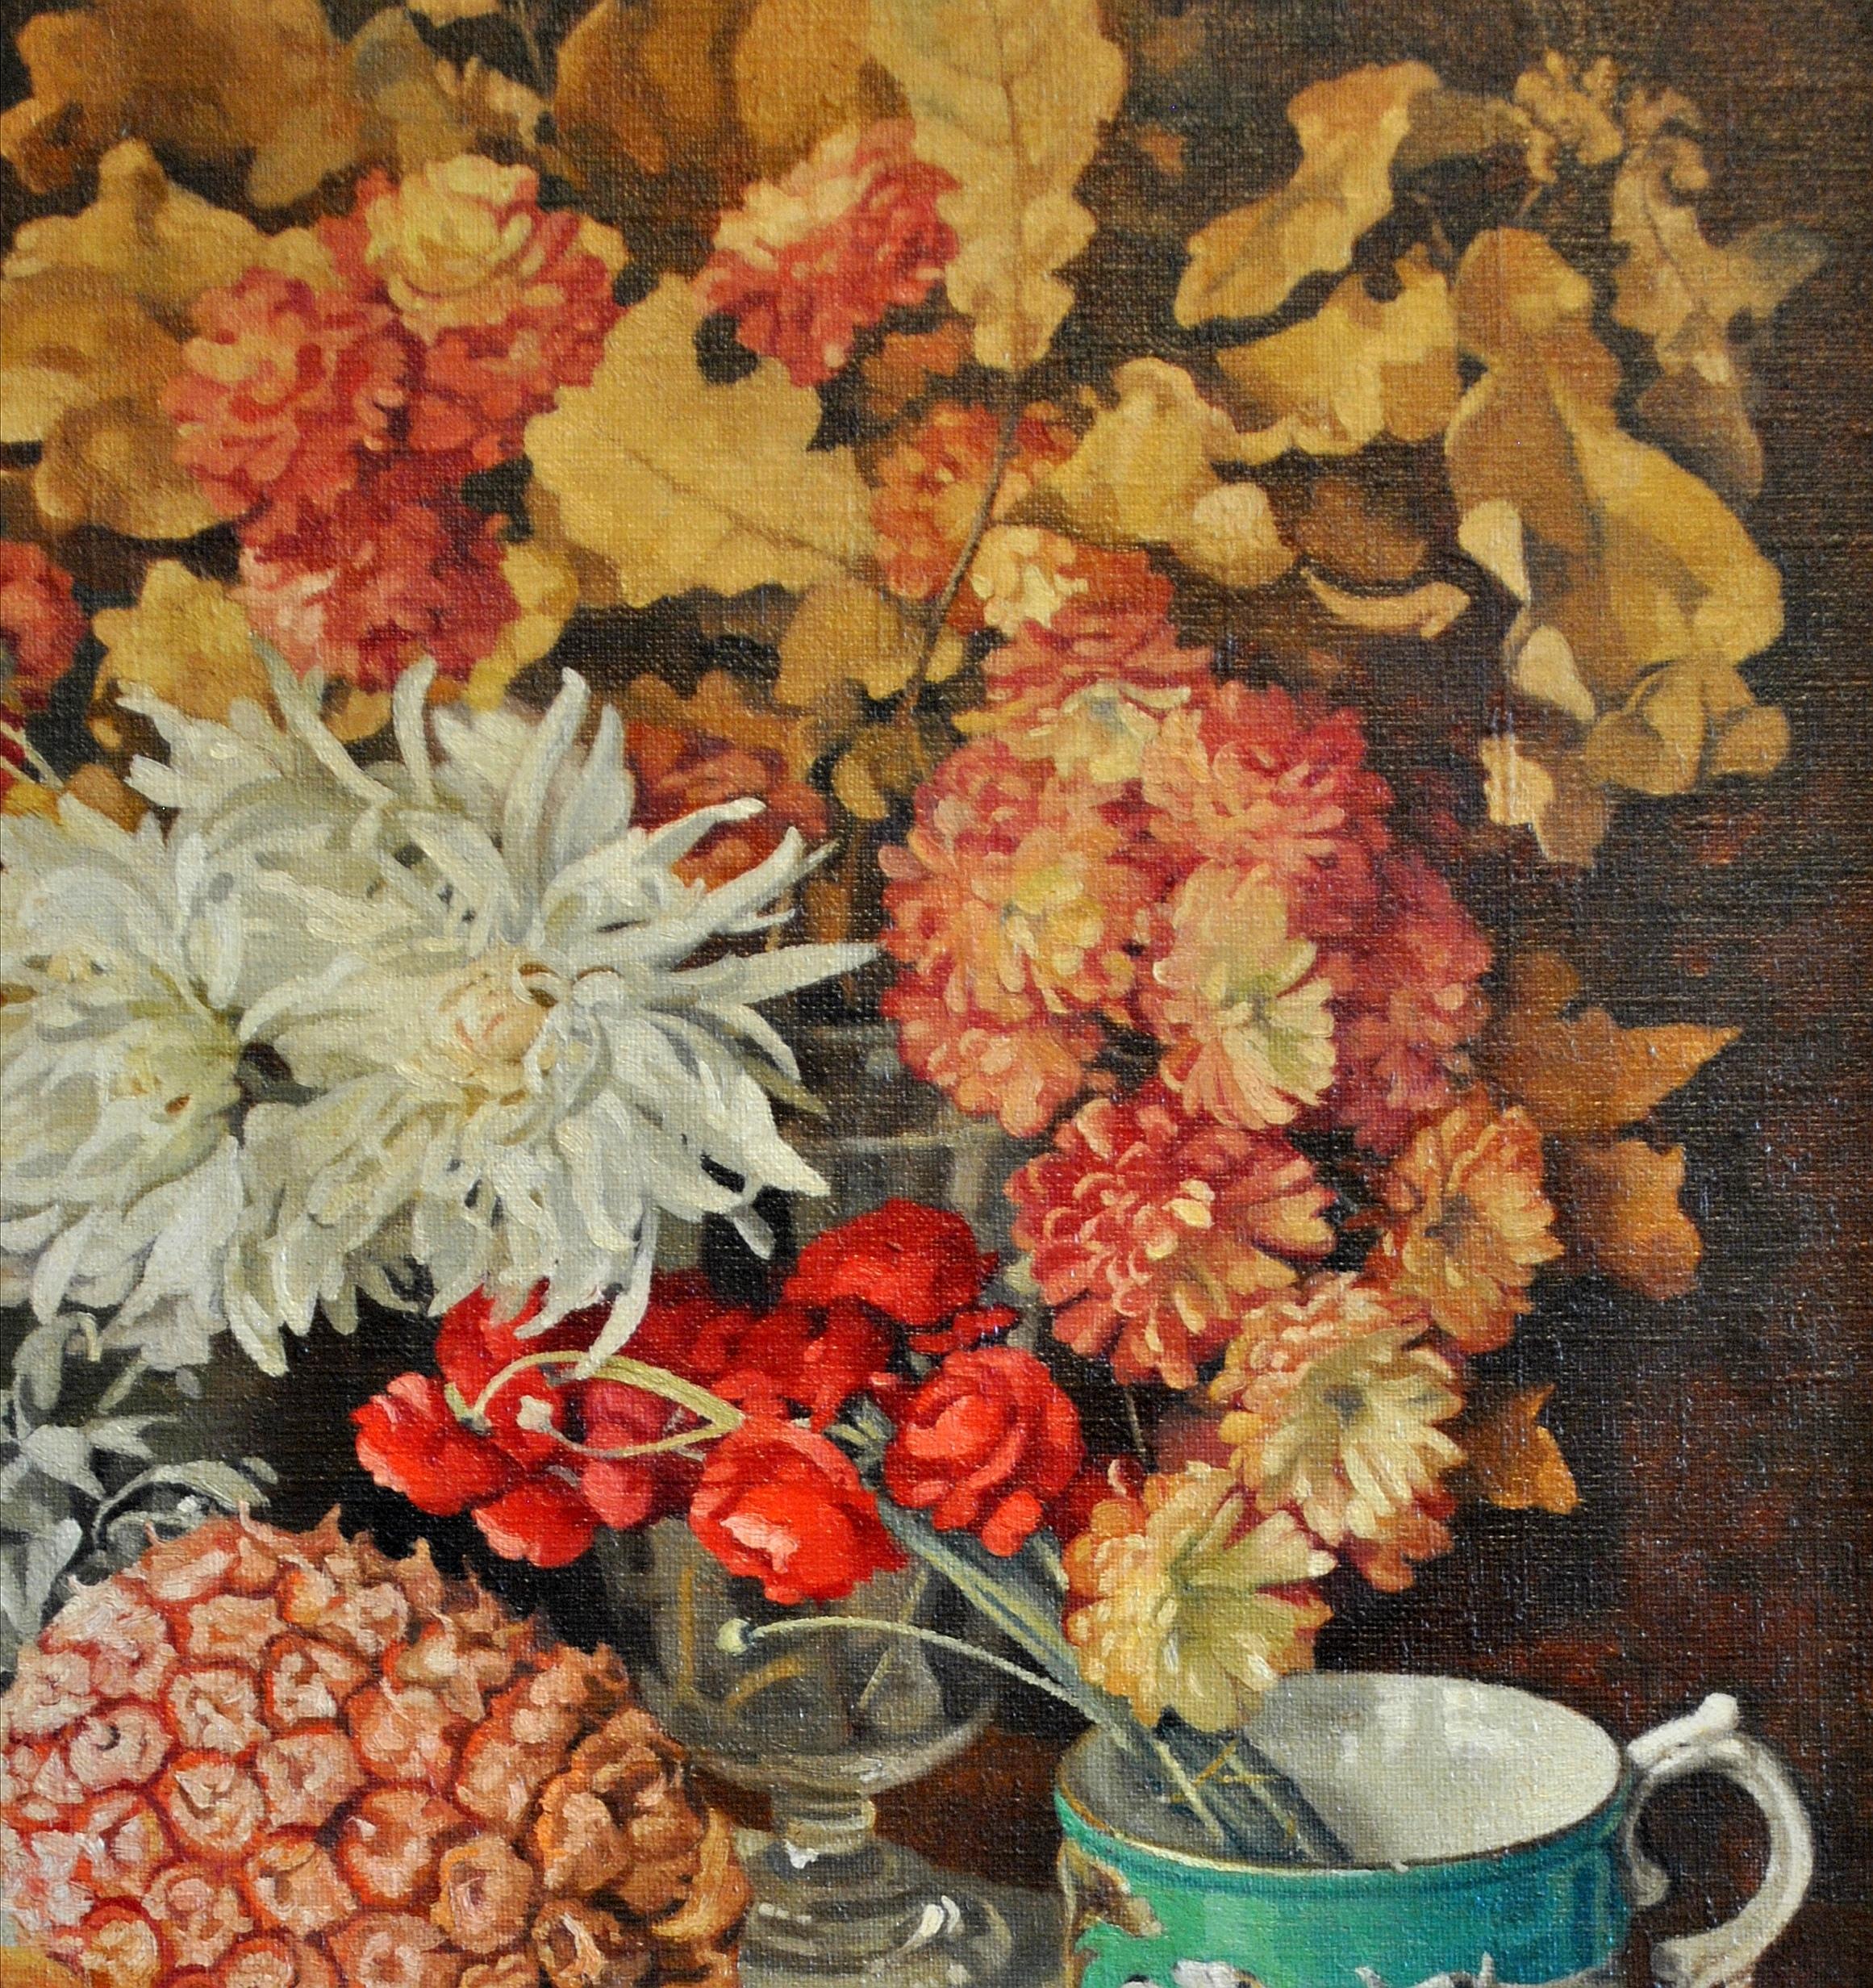 Still Life - Art Deco Flowers Pineapple & Greyhound Cup Antique Oil Painting 1